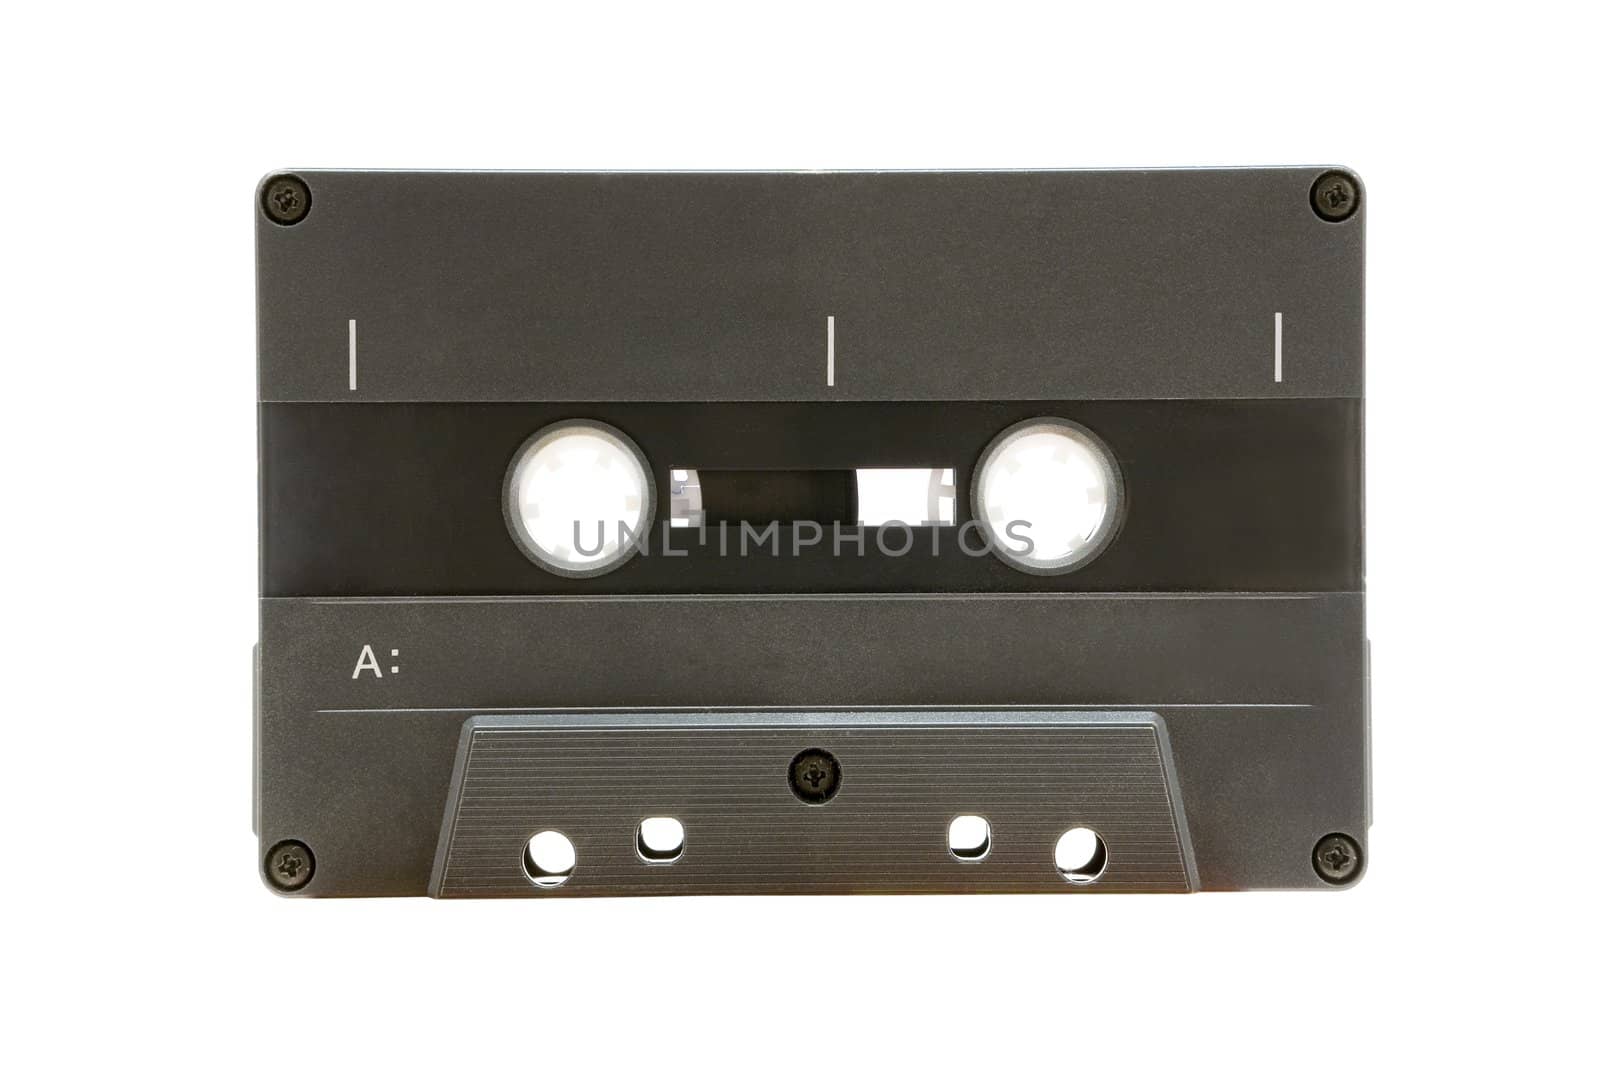 Vintage audio tape isolated on a white background.